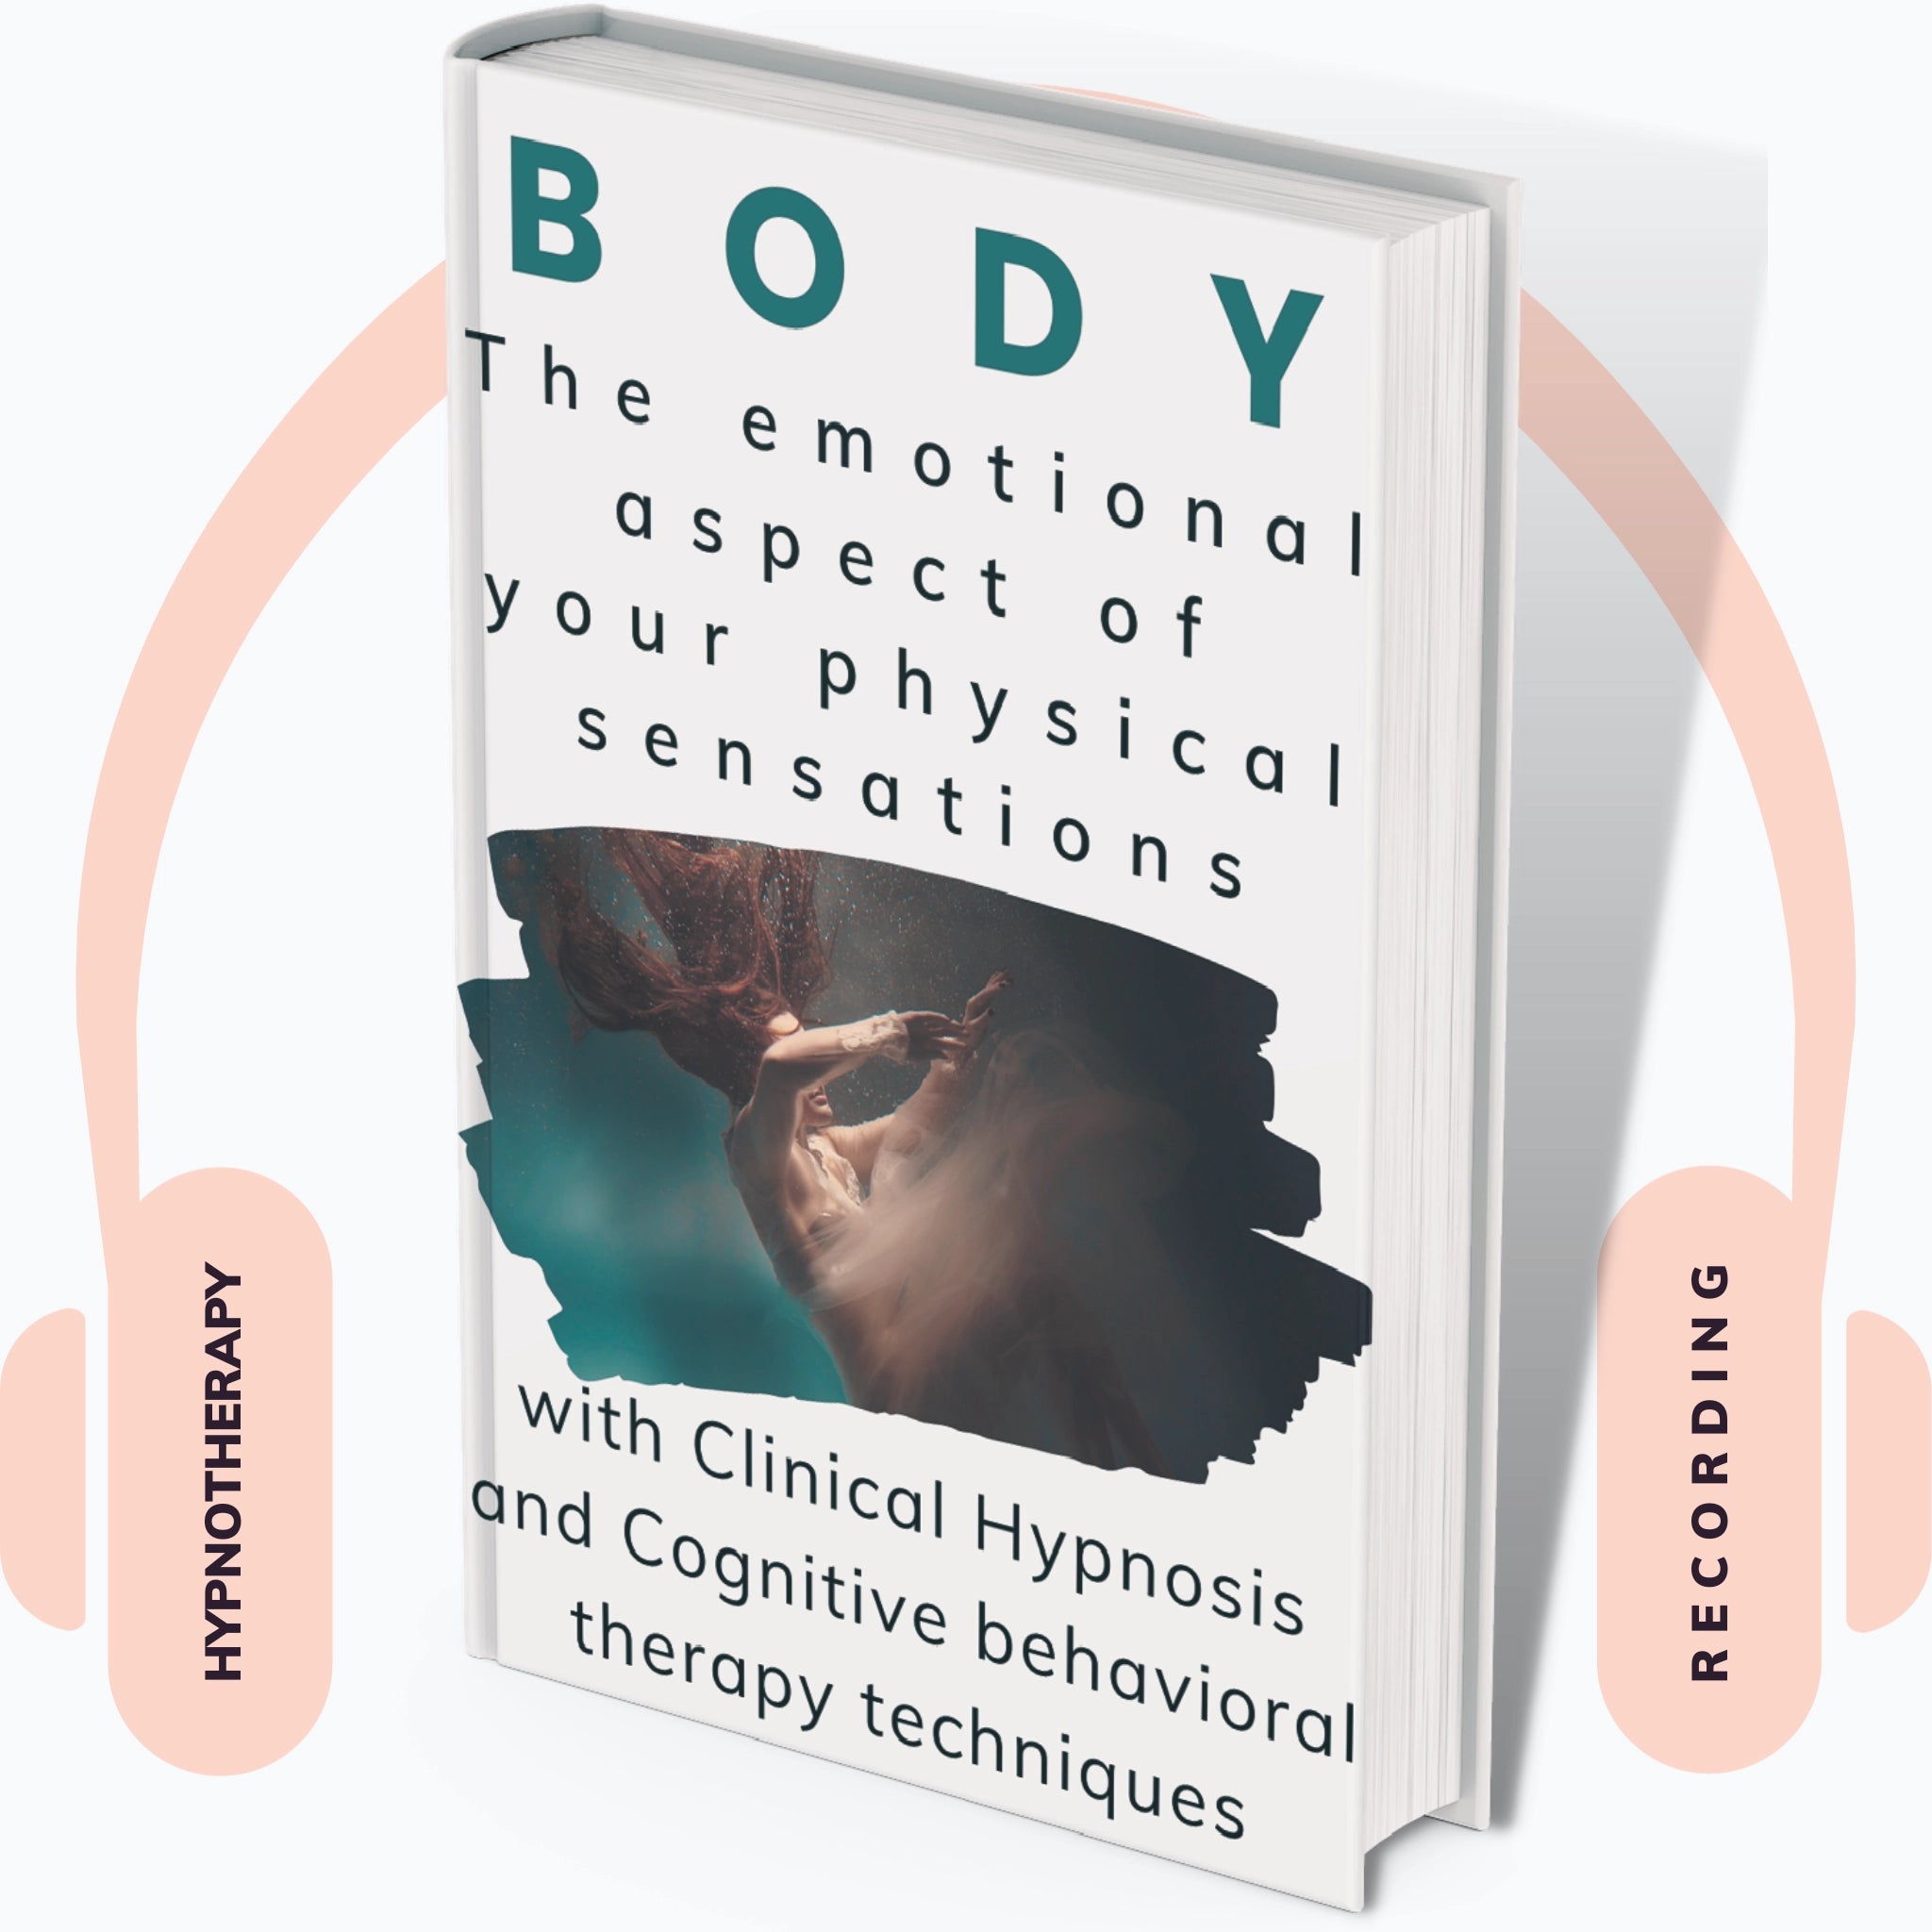 Audiobook cover: In Body, part 2, the emotional aspect of your physical sensations, with Clinical Hypnosis and Cognitive Behavioral Therapy techniques